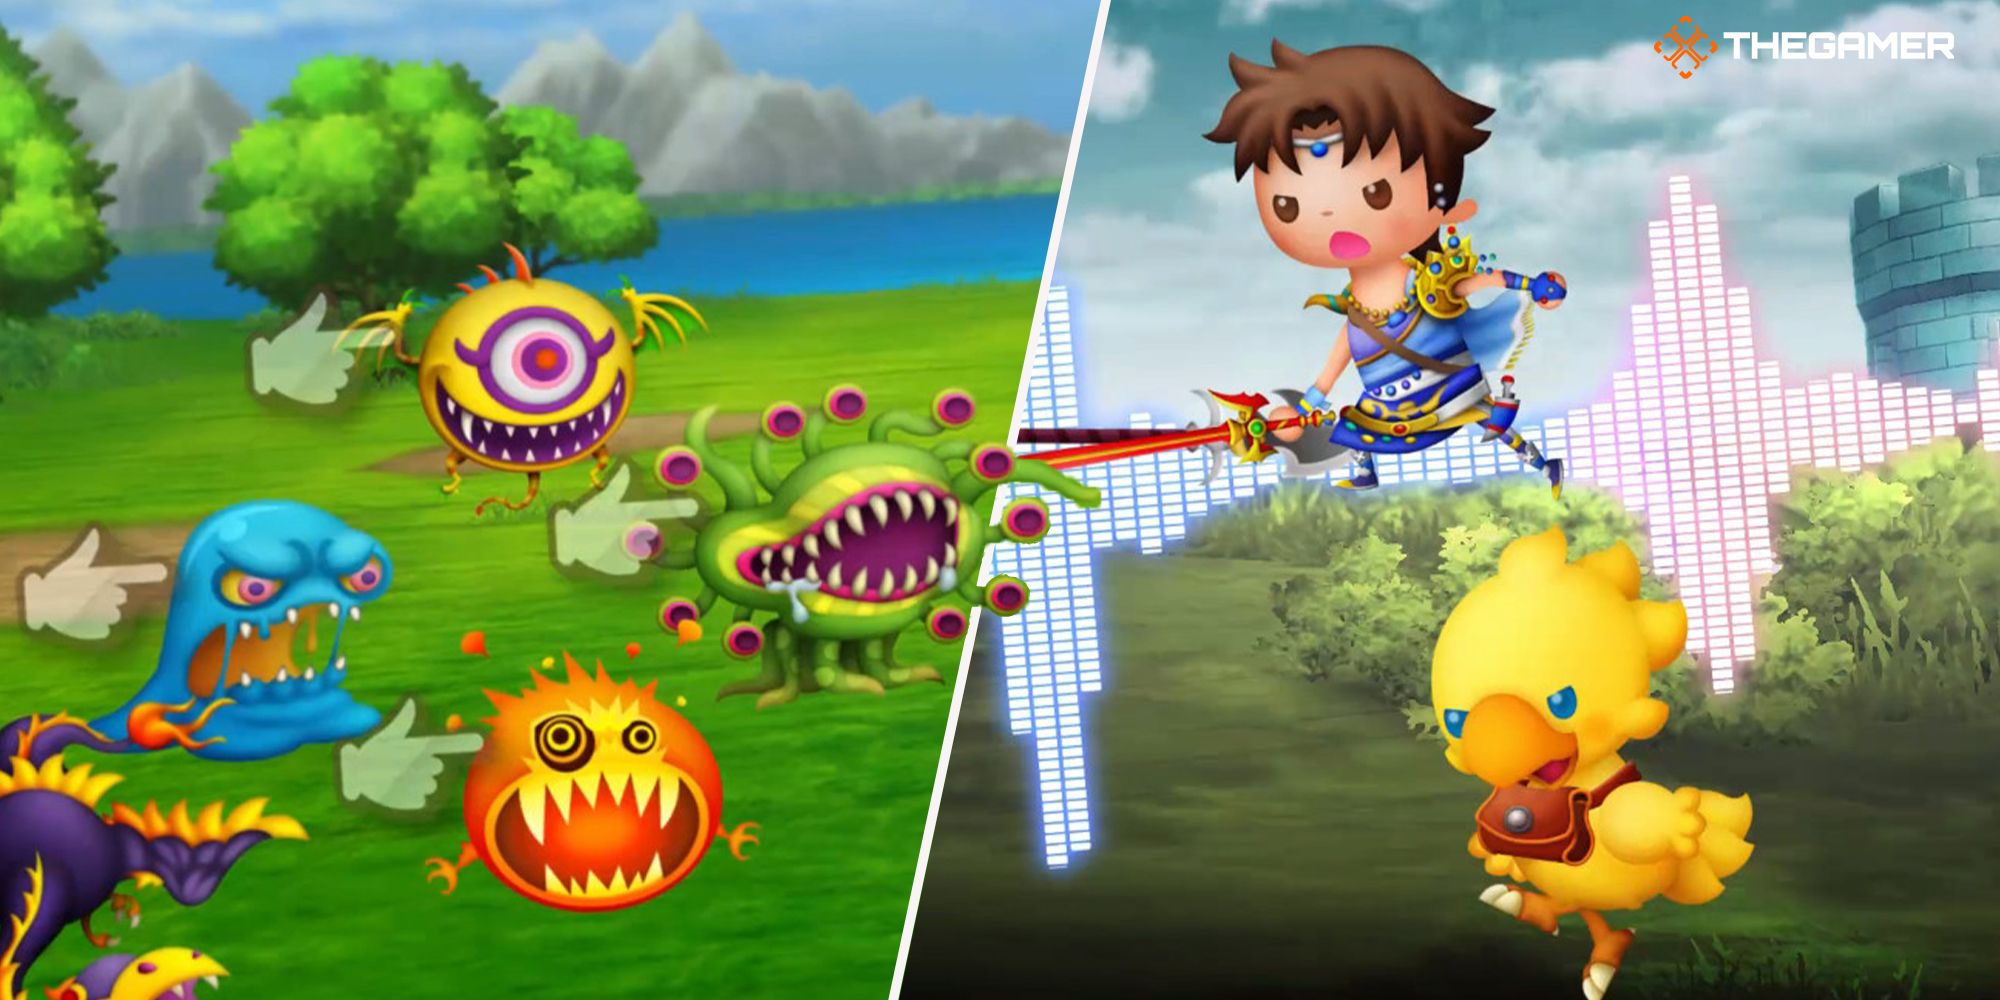 Left Panel: Monsters targeted in a field by blinking cursors. Right Panel: Bartz and Chocobo preparing to attack near a castle. Theatrhythm: Final Bar Line.